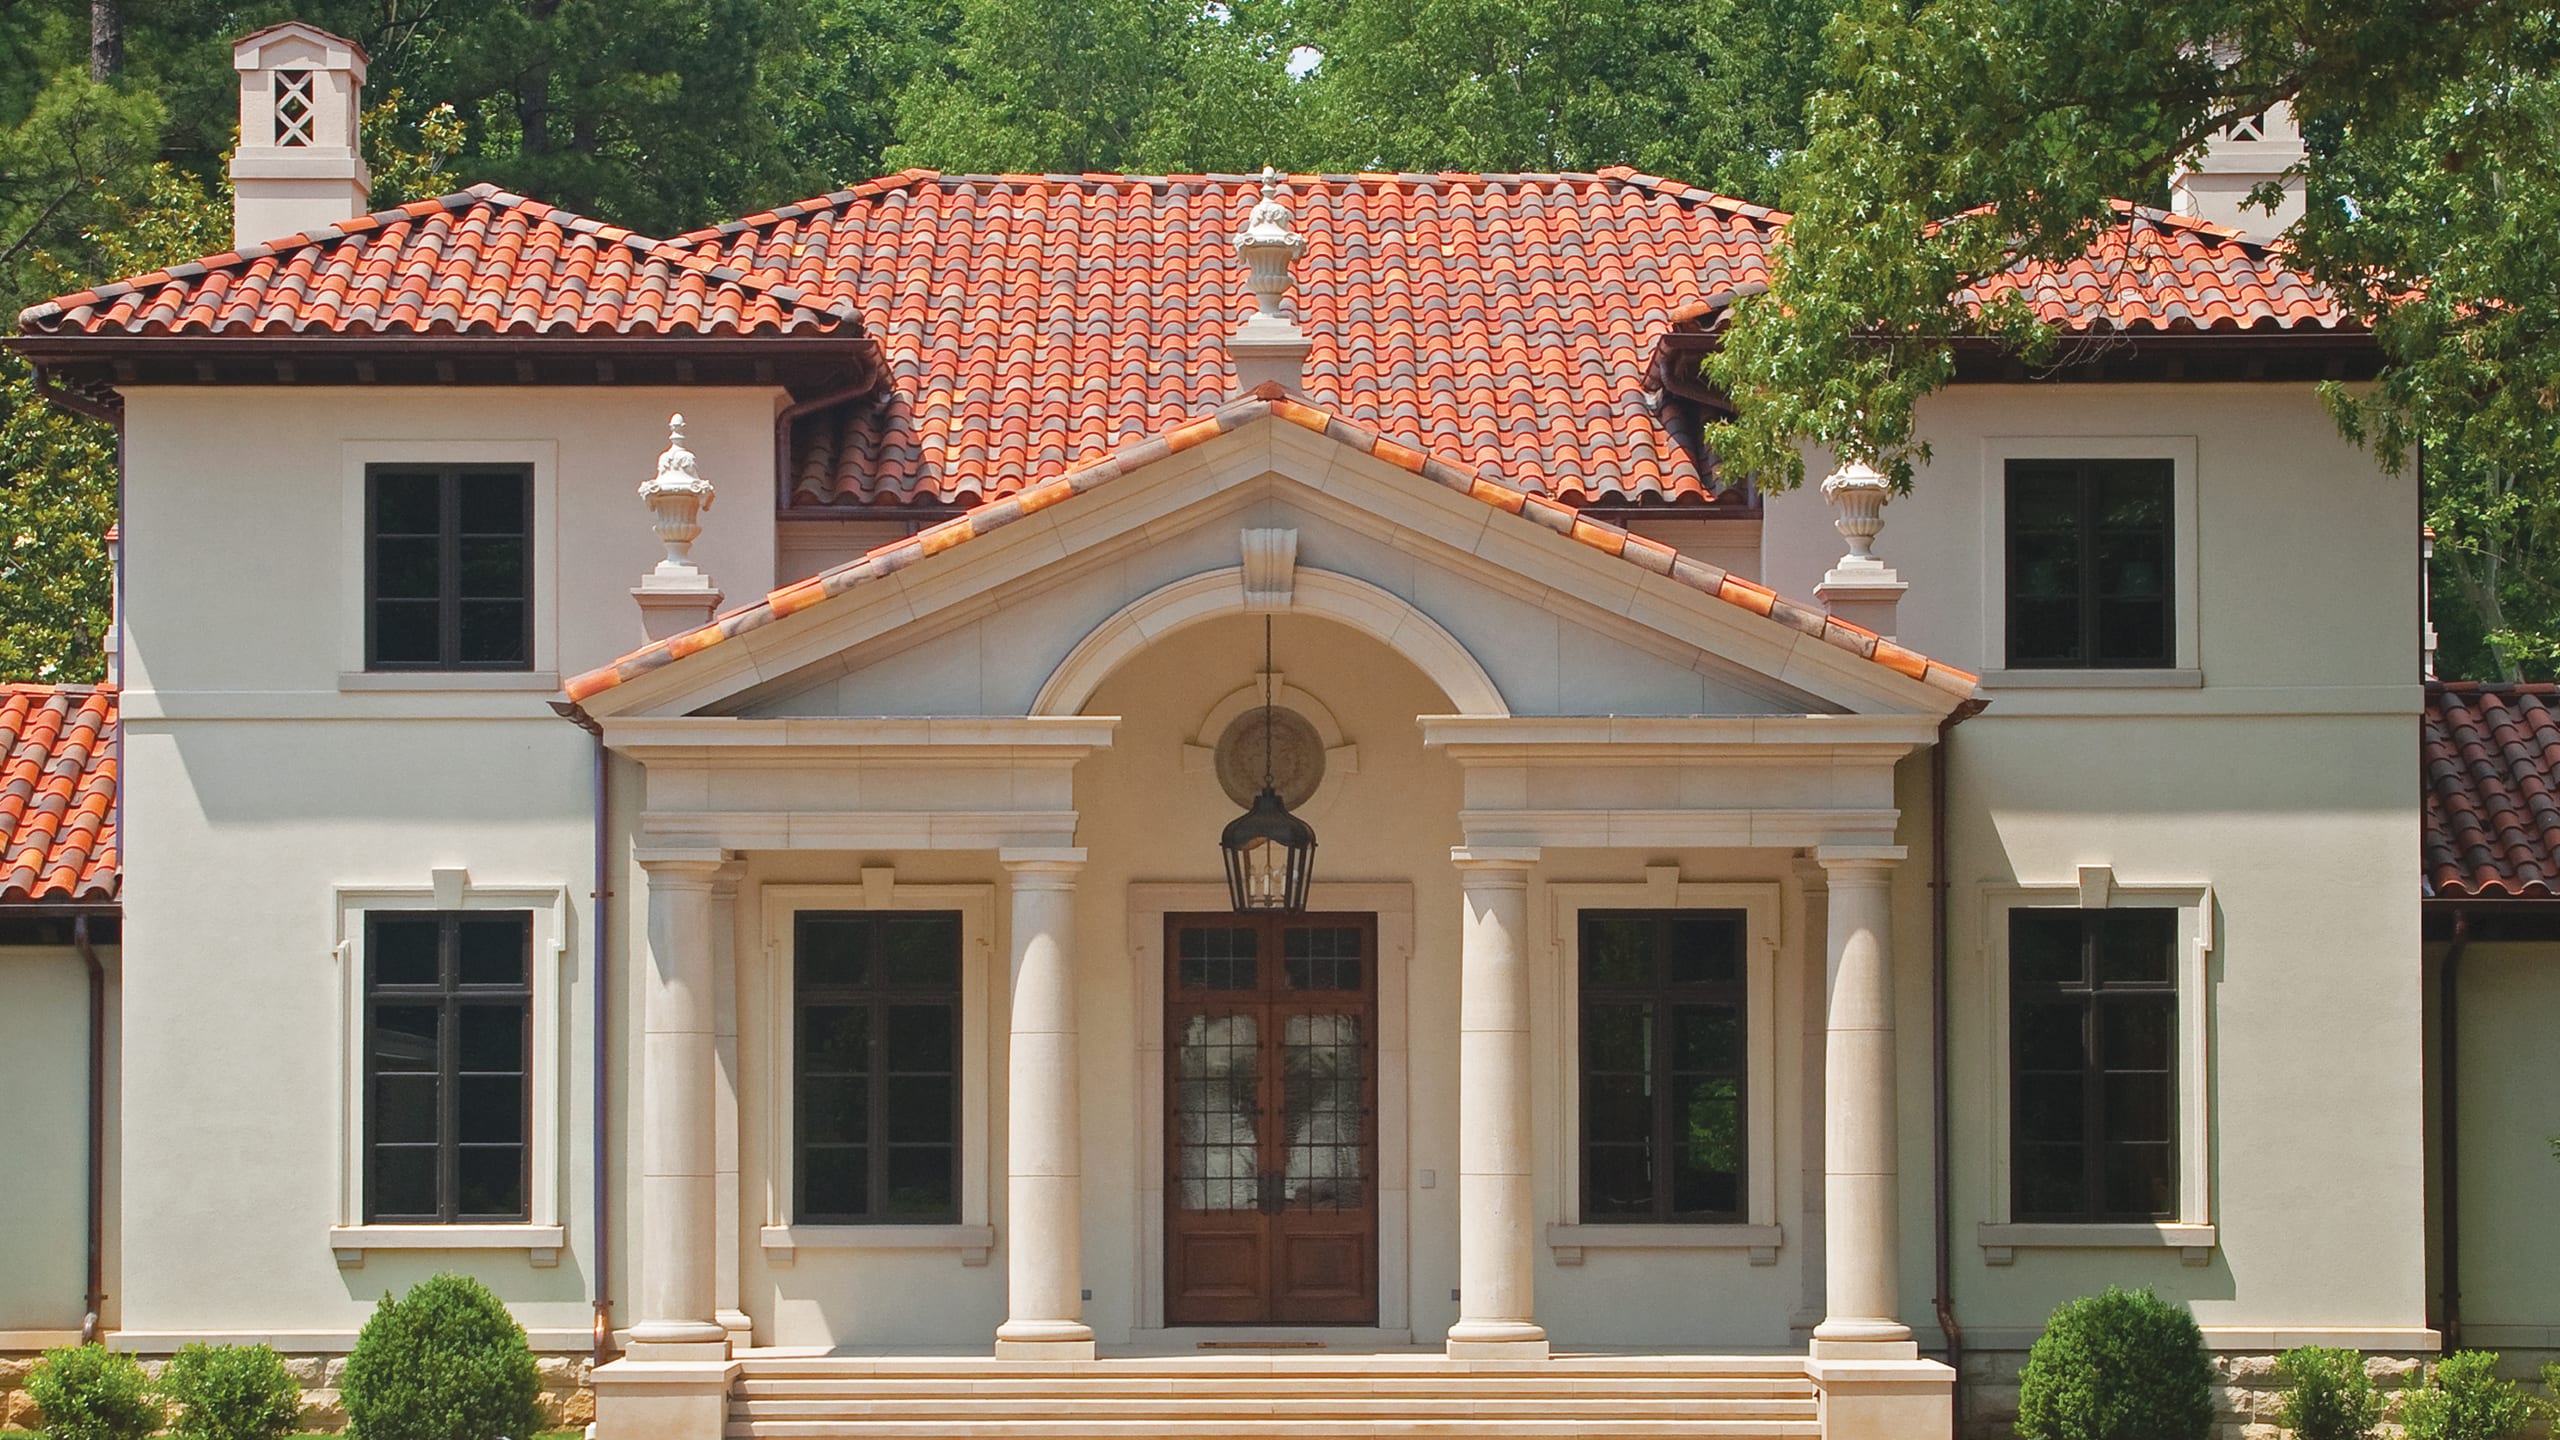 Private Residence - Memphis Ludowici Roof Tile